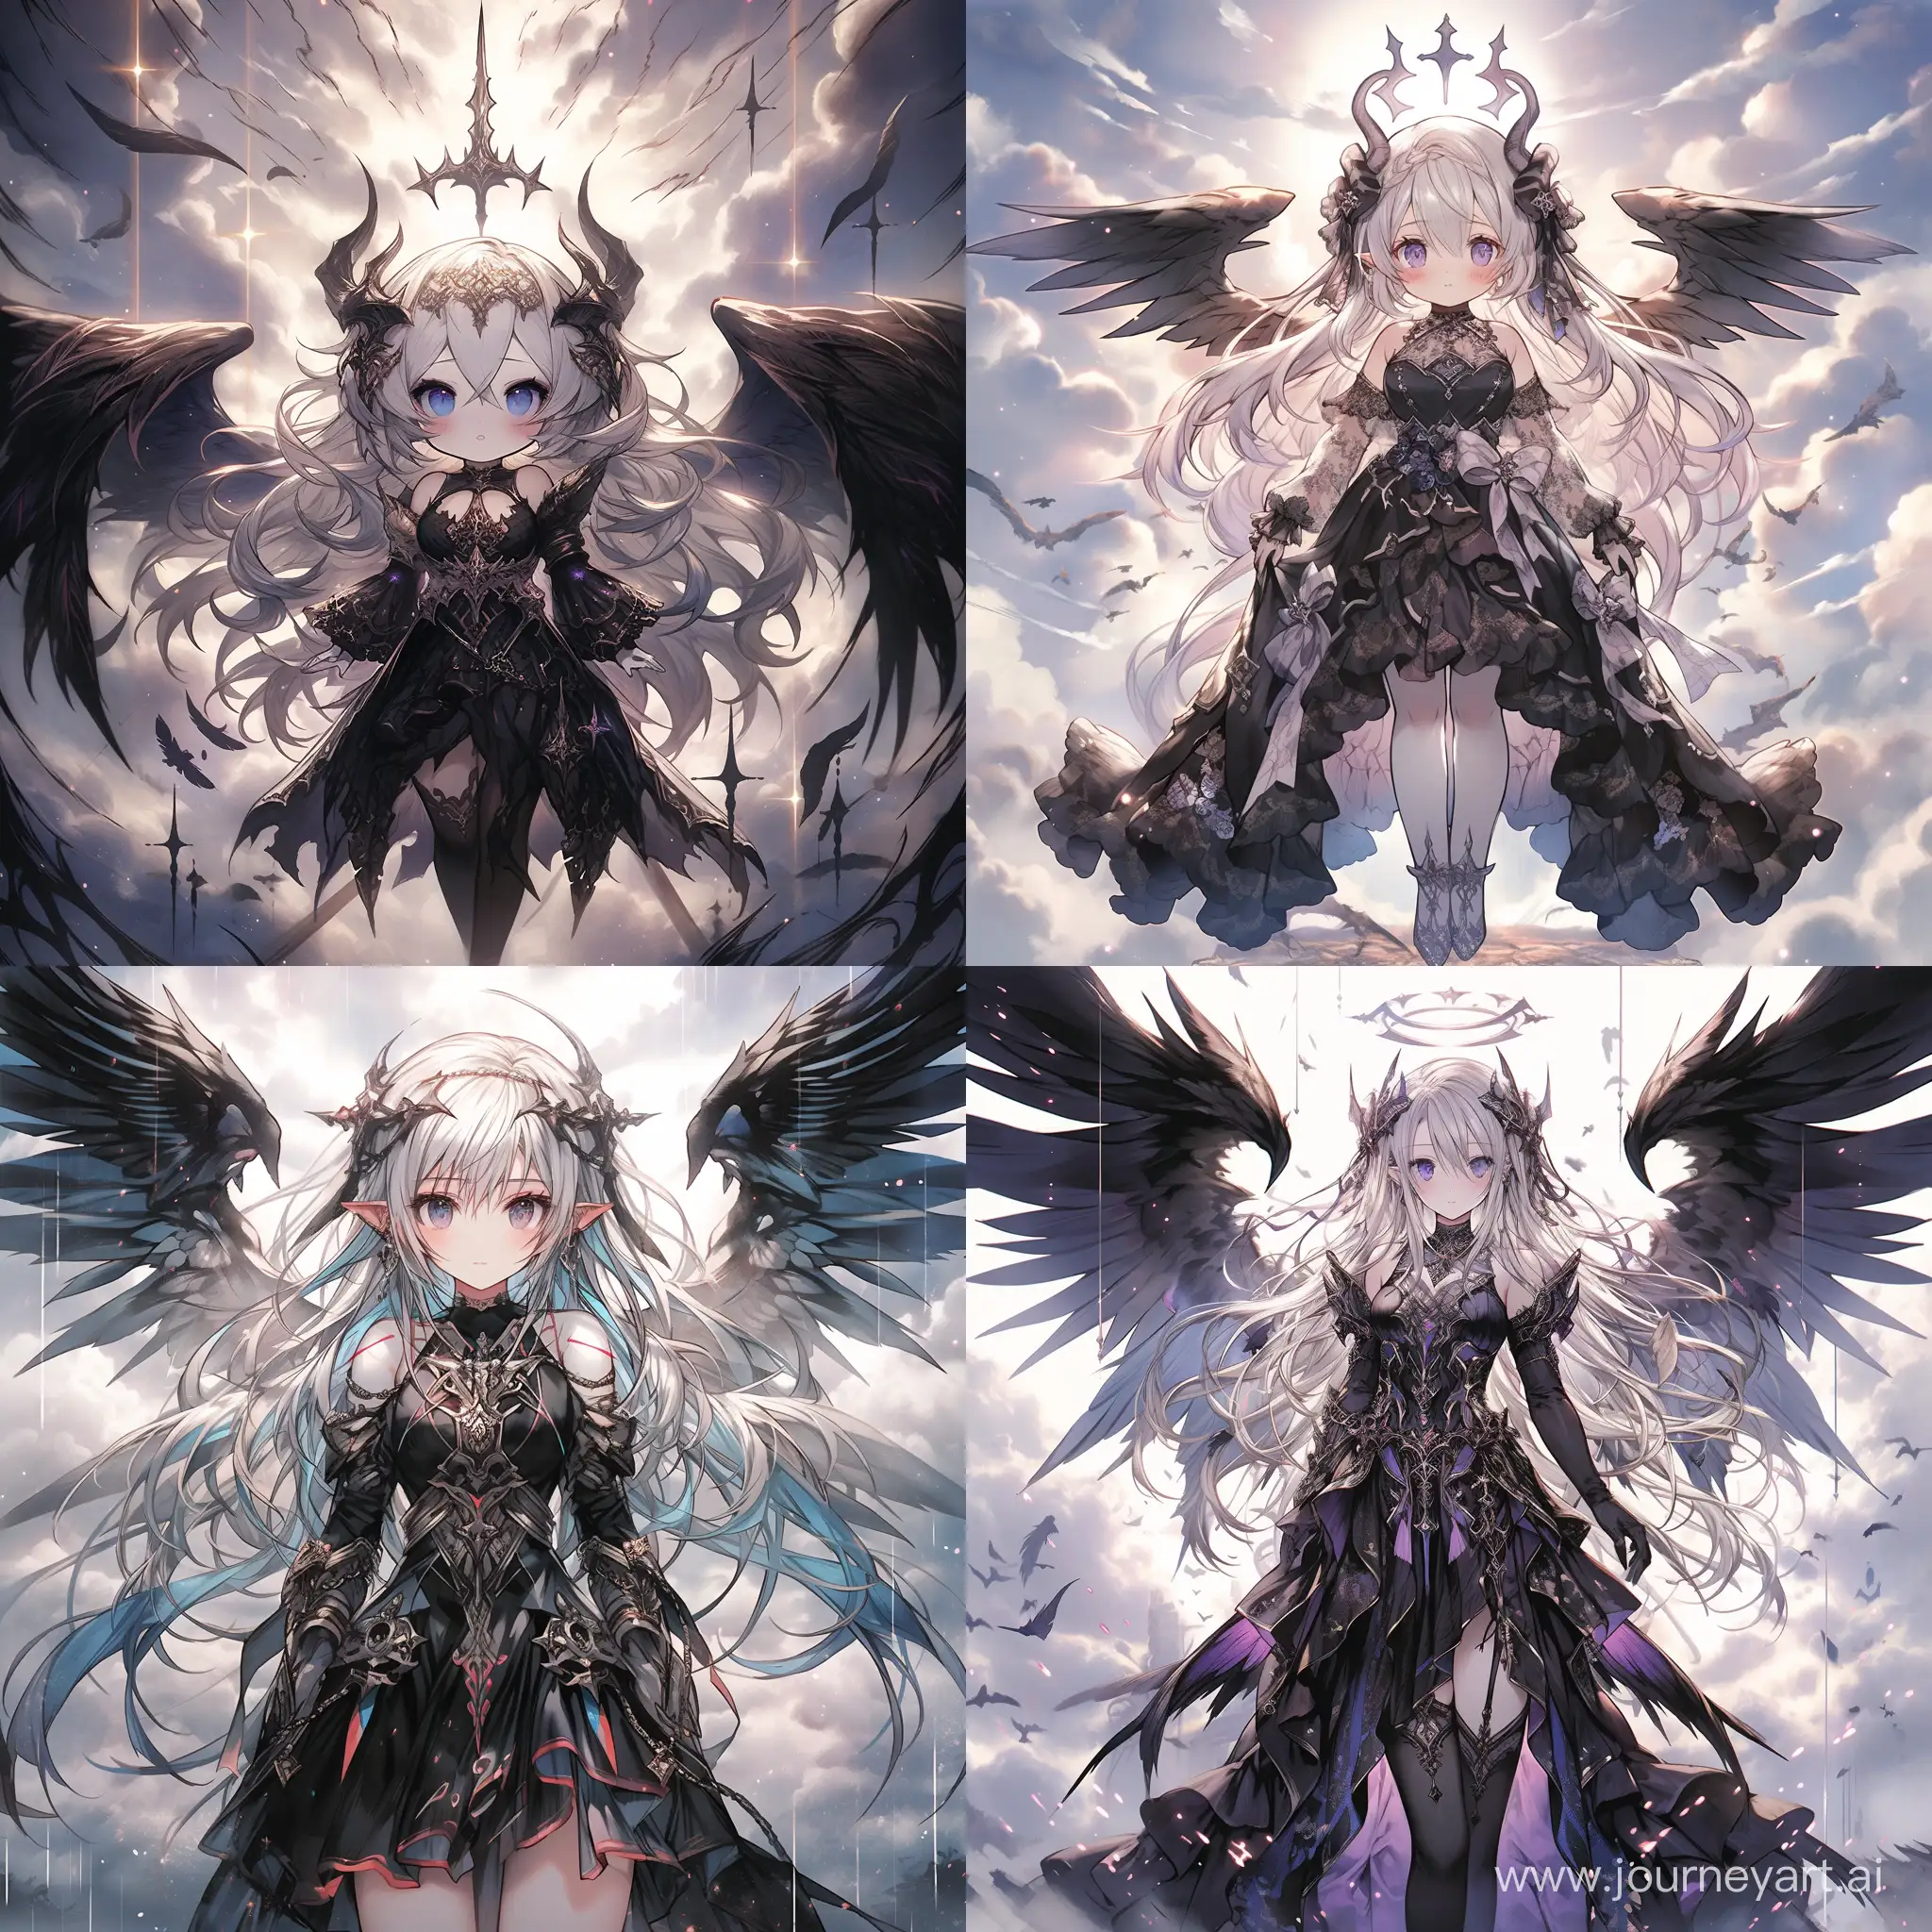 Kawaii girl dark angel with large black wings, standing in front of a sky background with white and blue hues, the angel has white hair and is wearing a armor-like outfit, the wings are spread out and there are black paint drips trailing from them, --niji 5 --s 500 